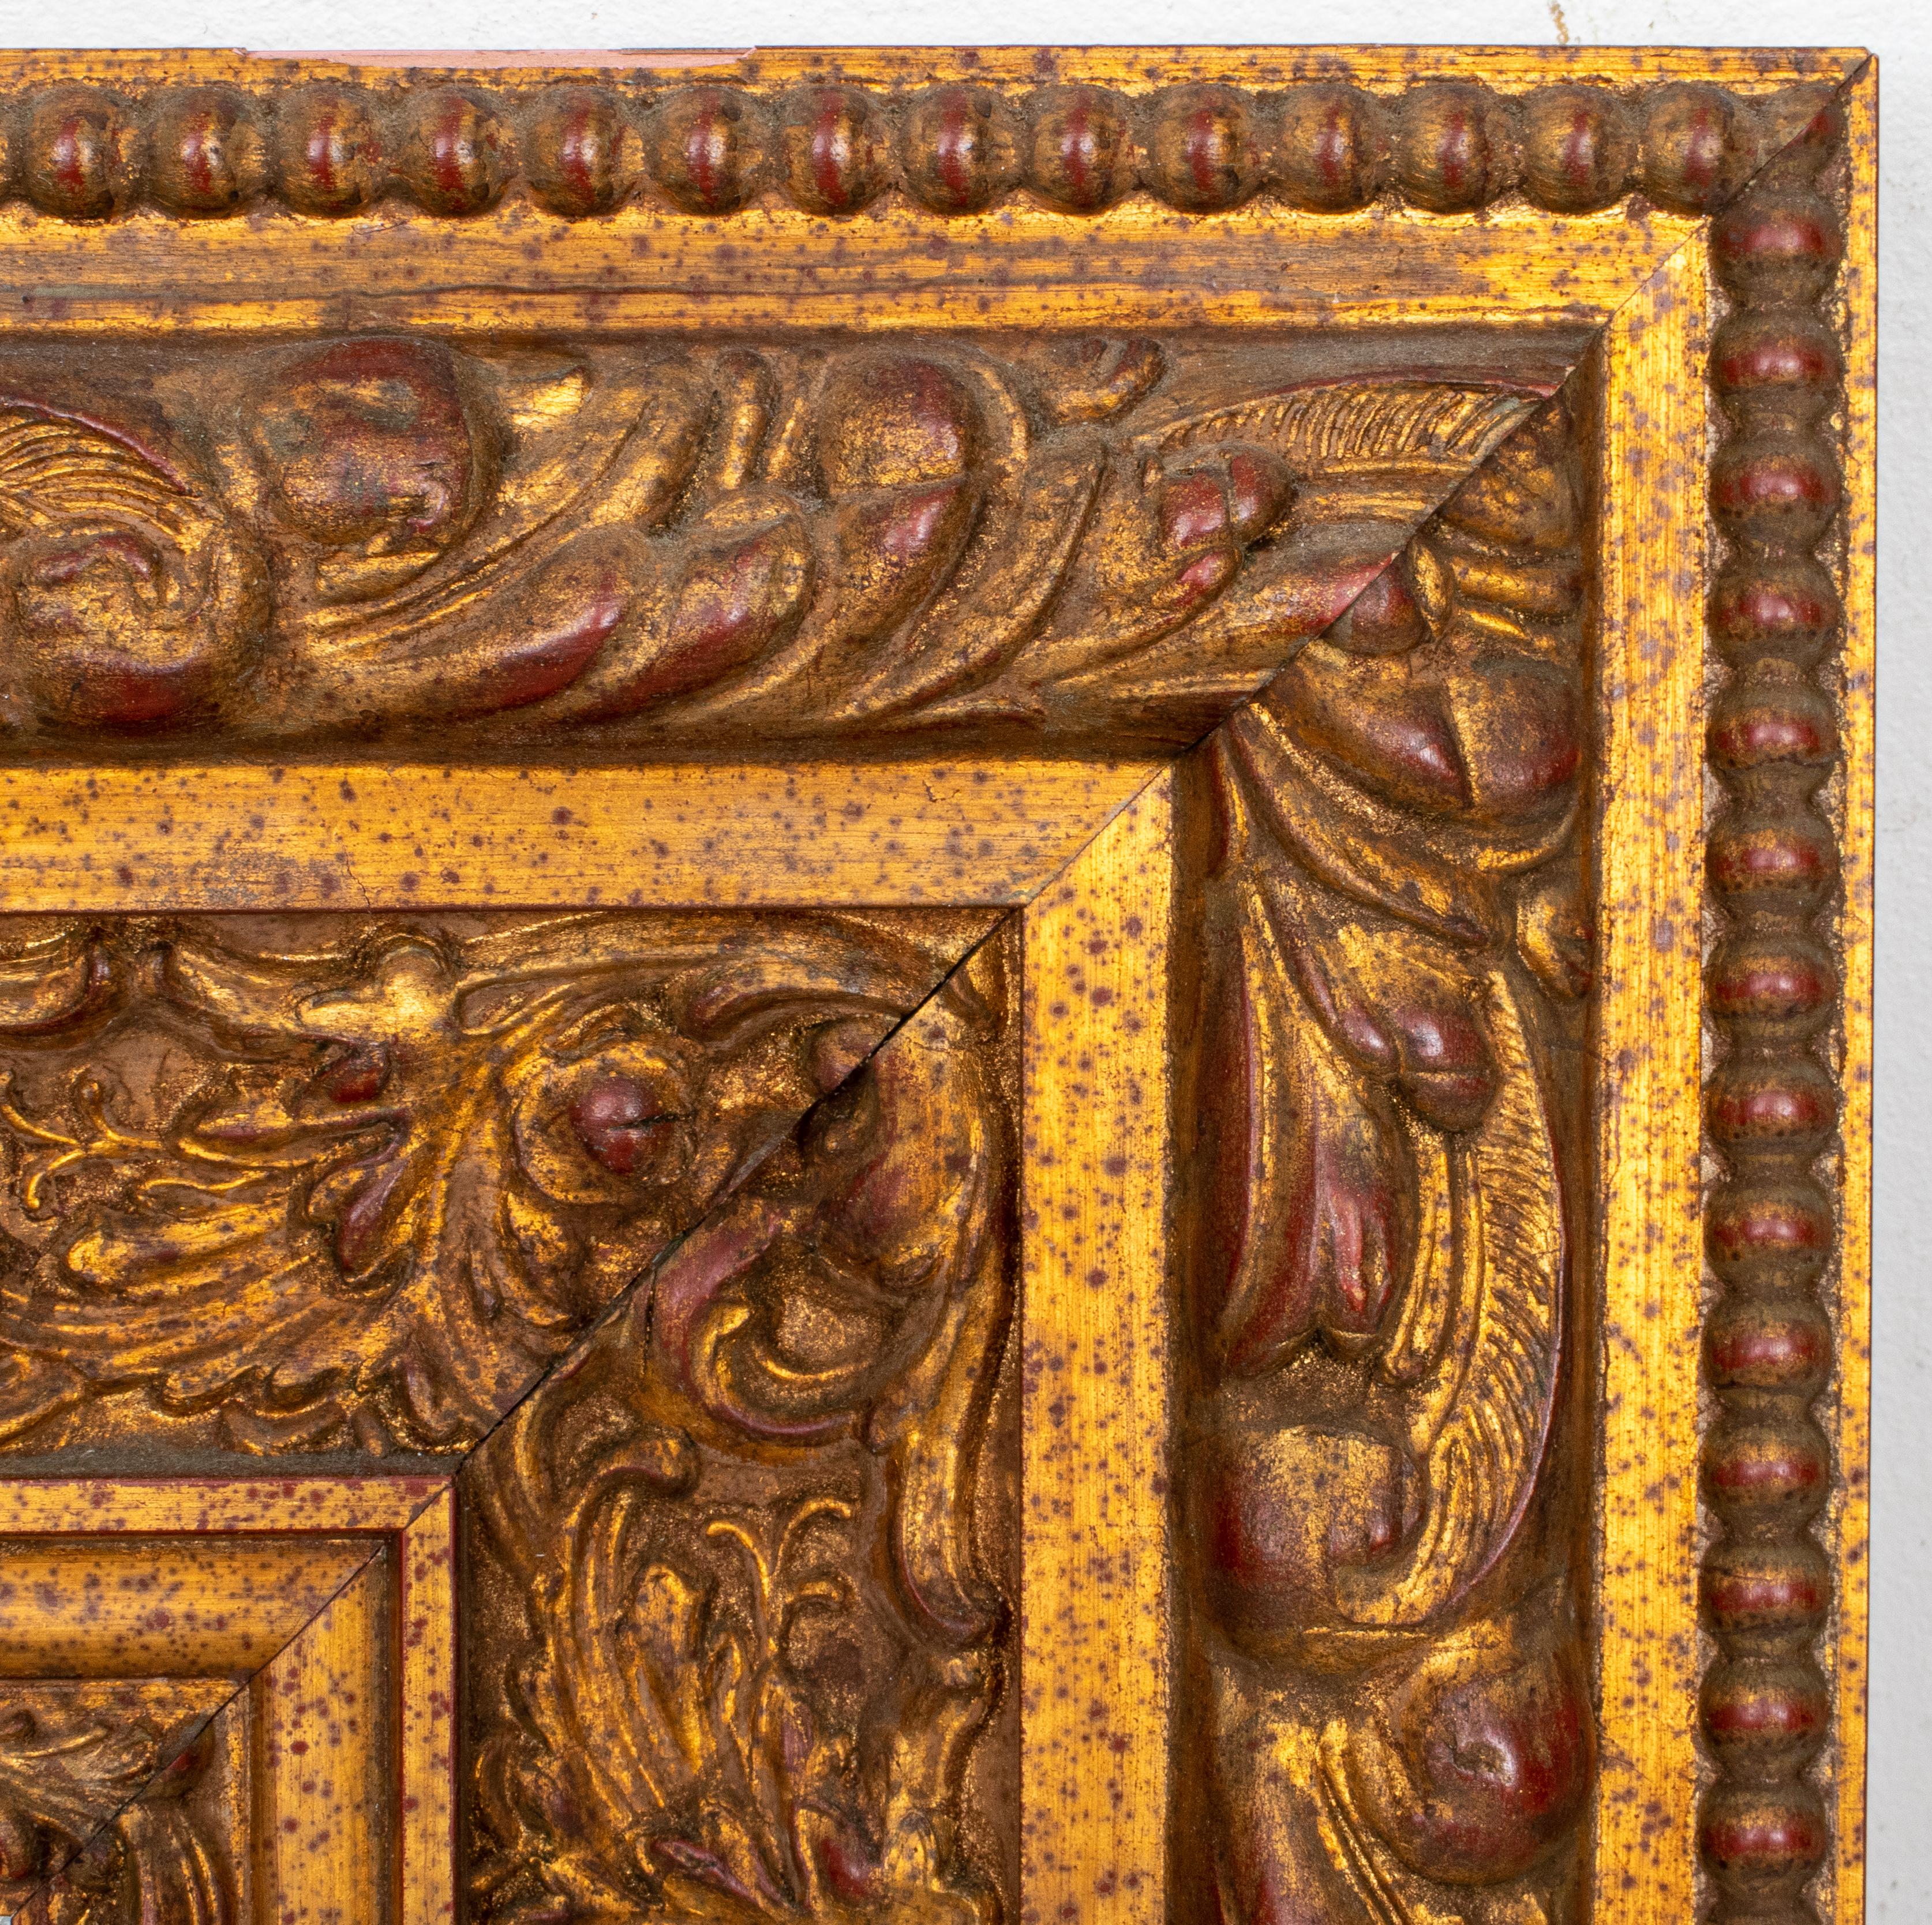 Italian Renaissance style gold-decorated frame, in the 16th century taste centering a beveled mirror surrounded by carved scrolling foliate and harvest motifs within a beaded border. 

Measures: 22